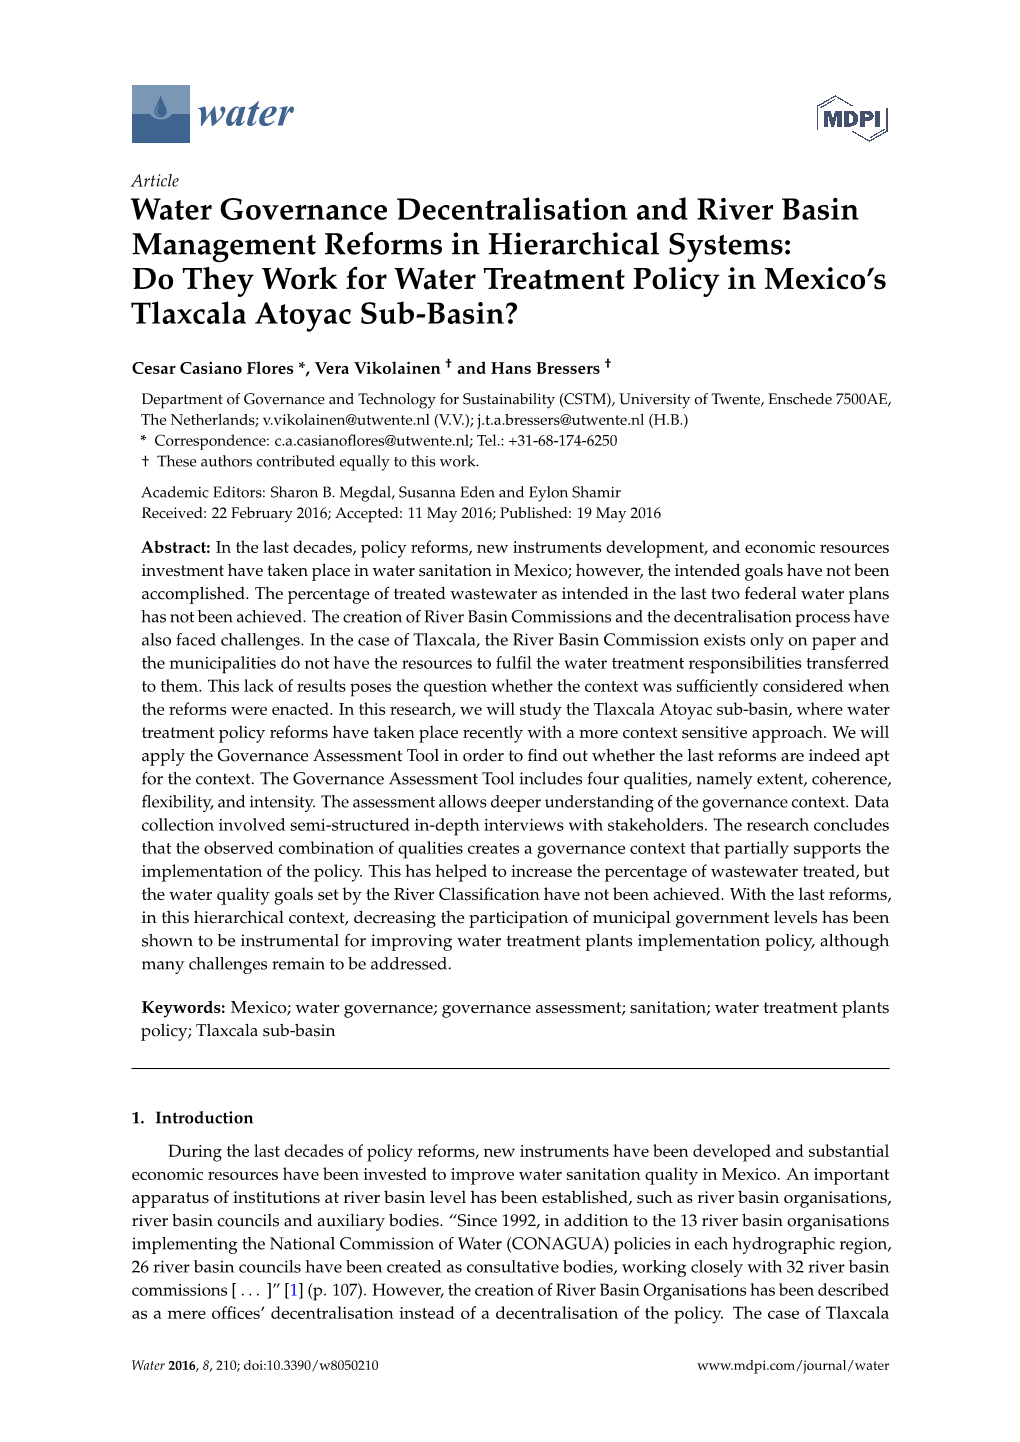 Water Governance Decentralisation and River Basin Management Reforms in Hierarchical Systems